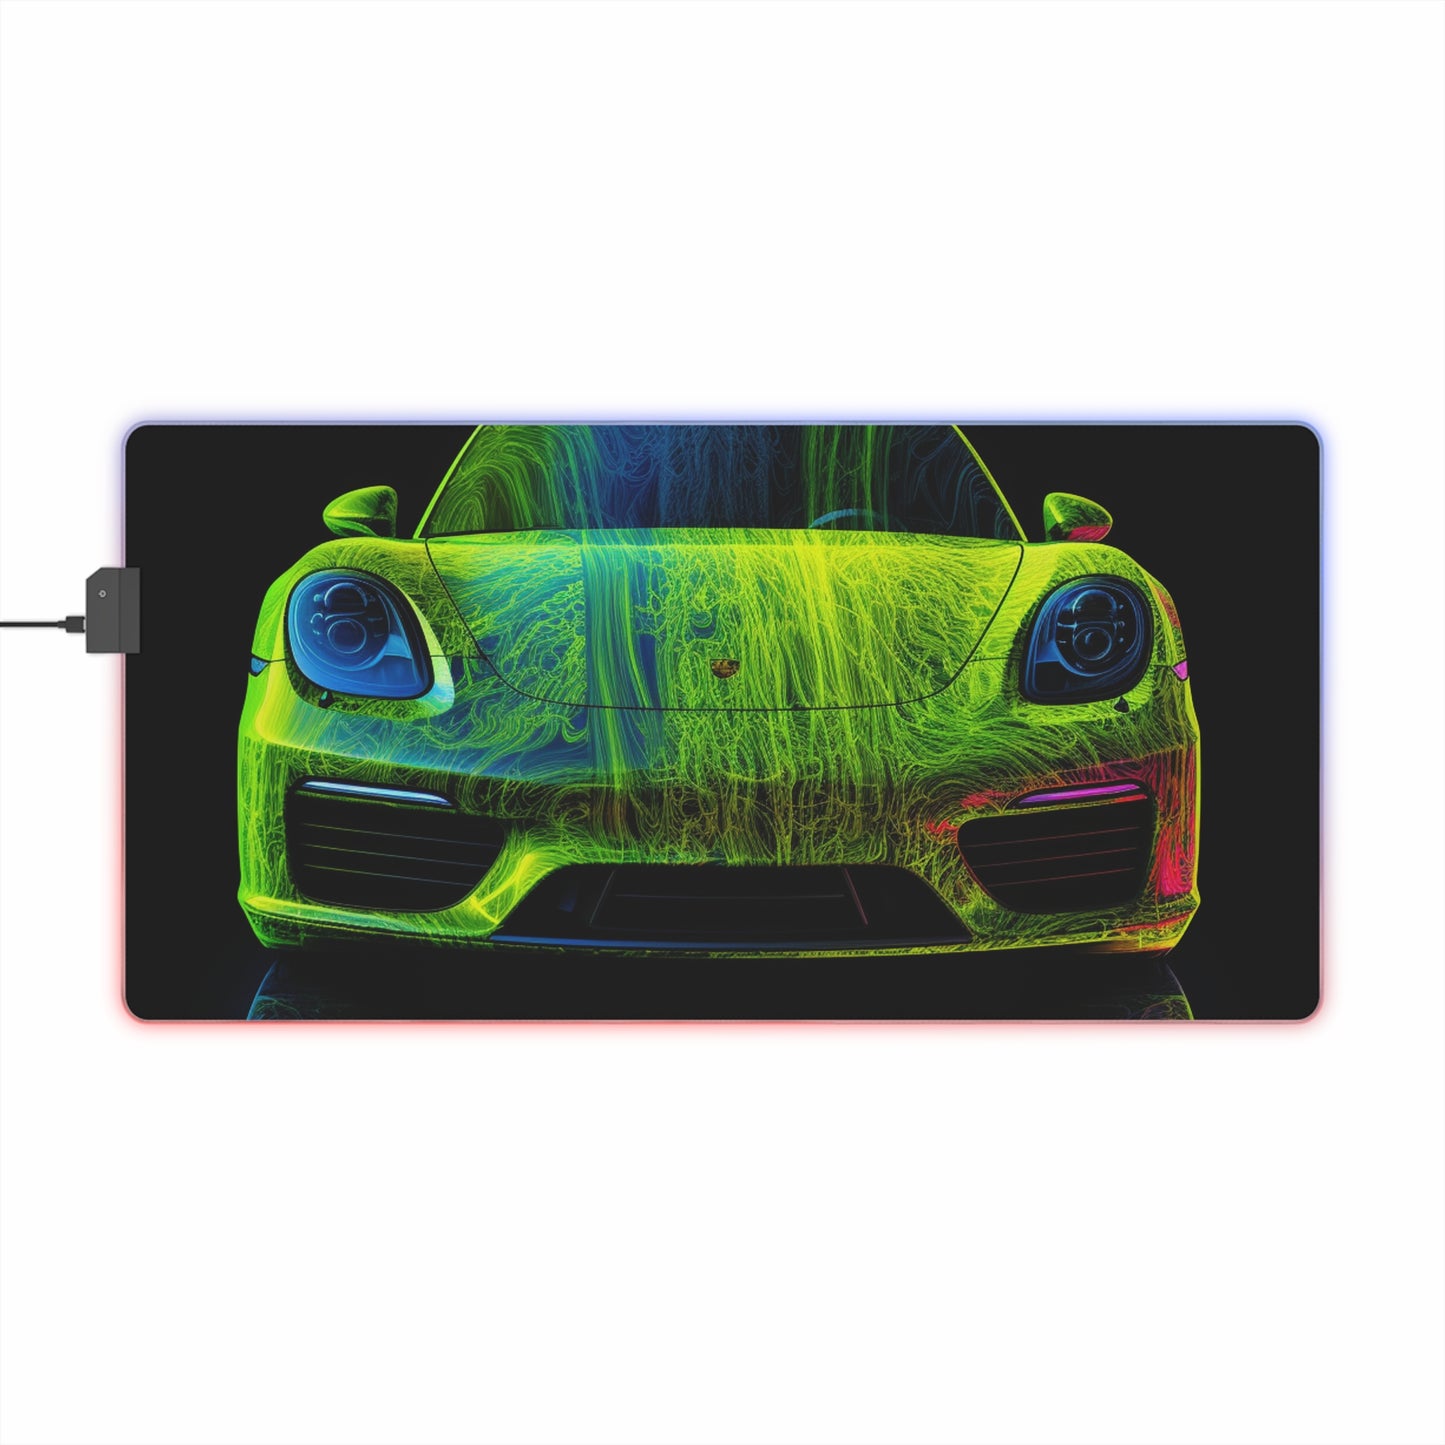 LED Gaming Mouse Pad Porsche Flair 3